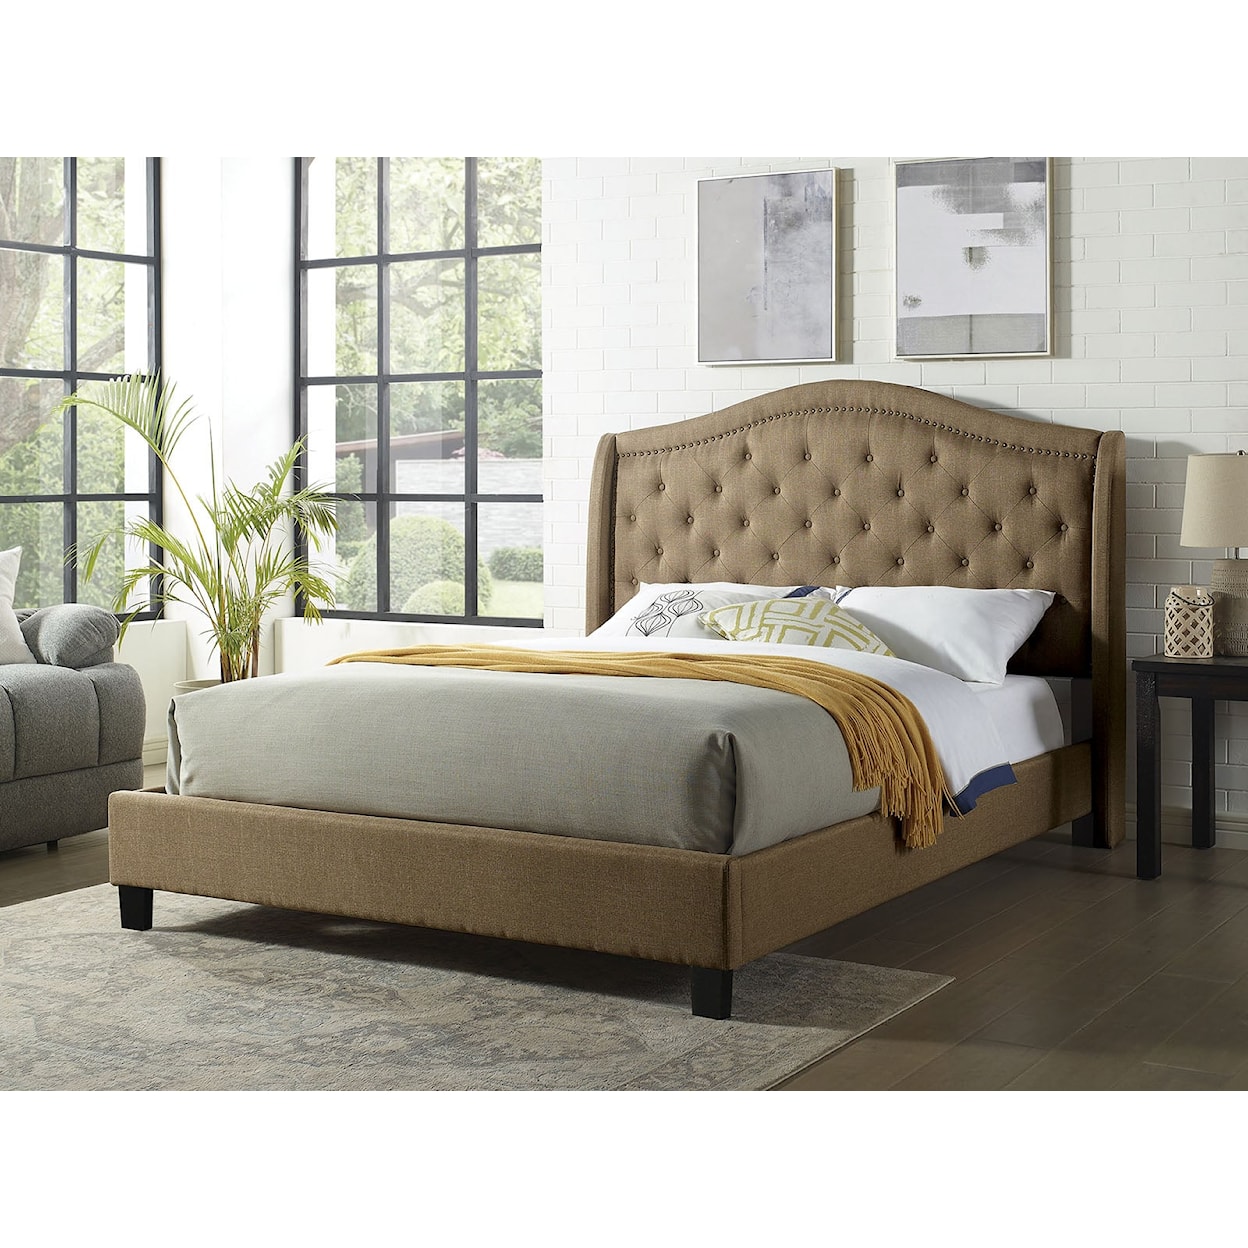 Furniture of America Carly Full Bed, Brown